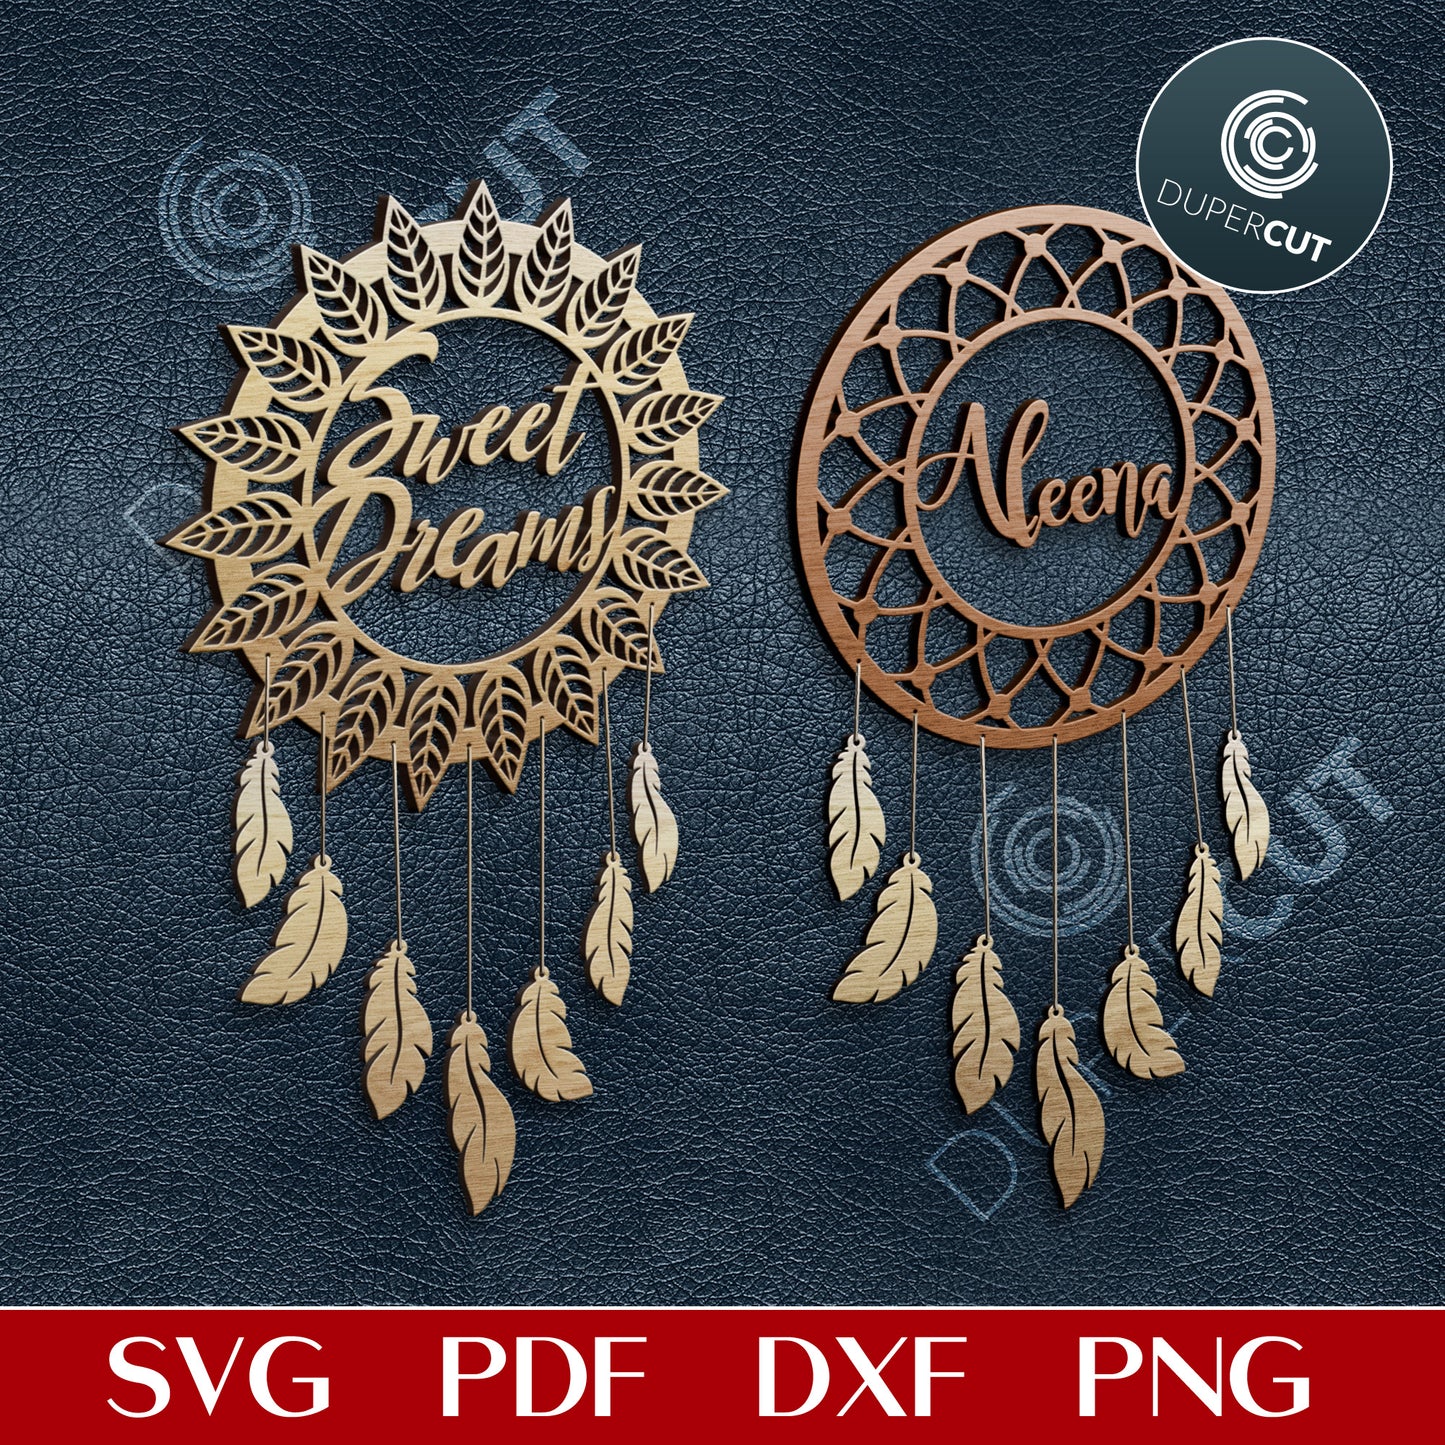 Personalised Native American Dreamcatcher - add custom baby name, attachable feathers. SVG PDF DXF vector files for Glowforge and laser CNC machines.